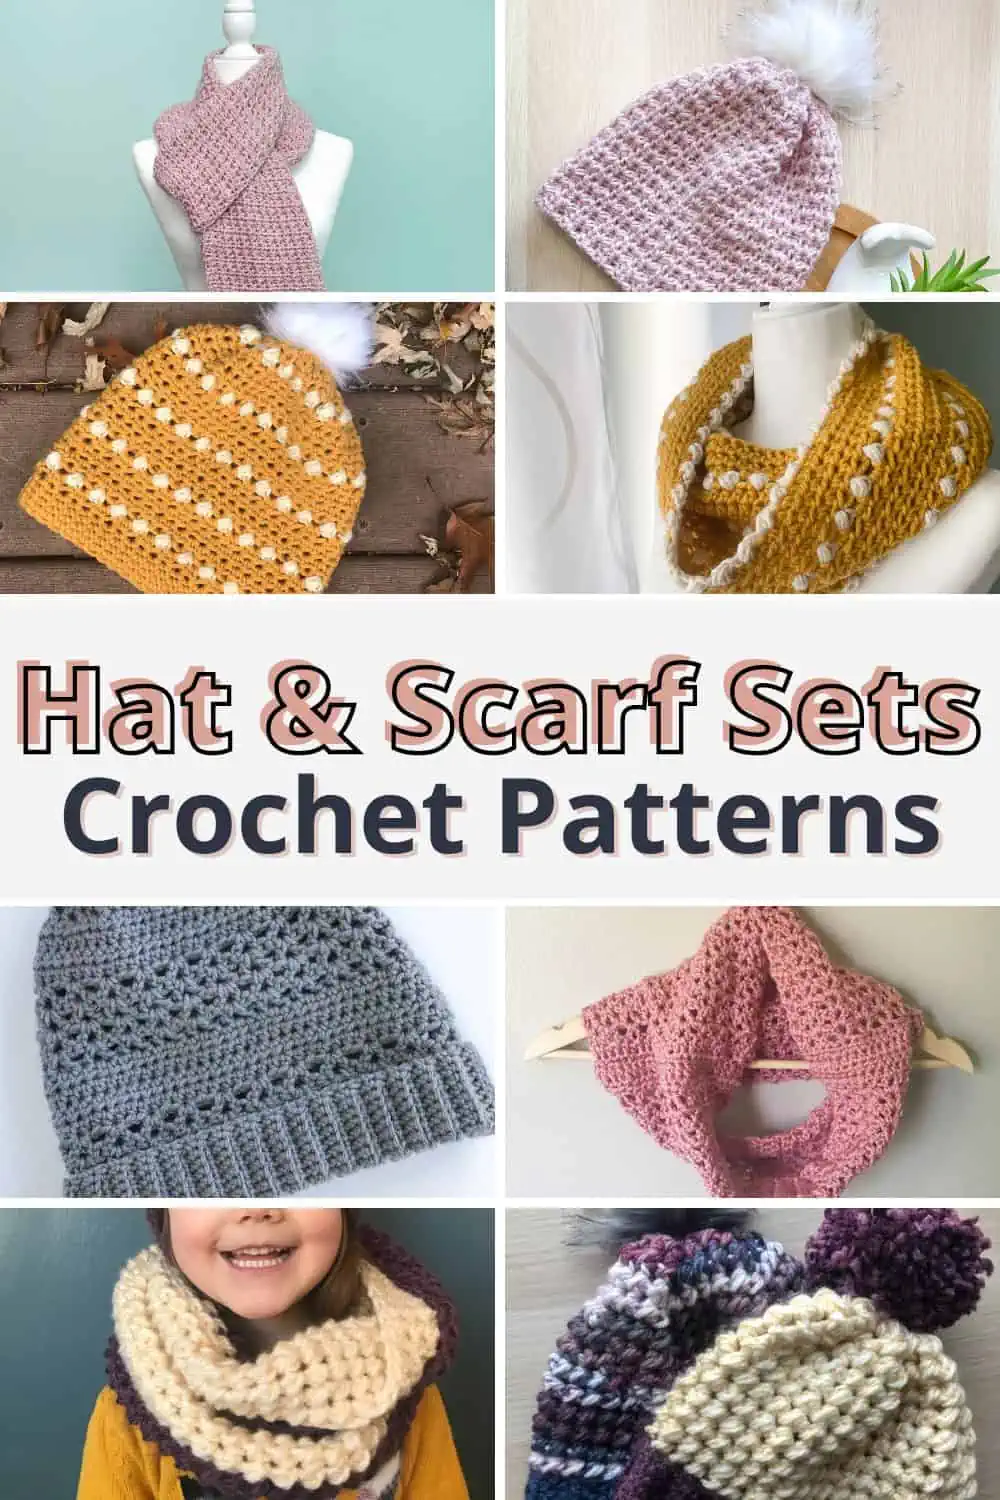 collage image with different crochet hat and scarves with text overlay reading "hat & scarf sets crochet patterns"